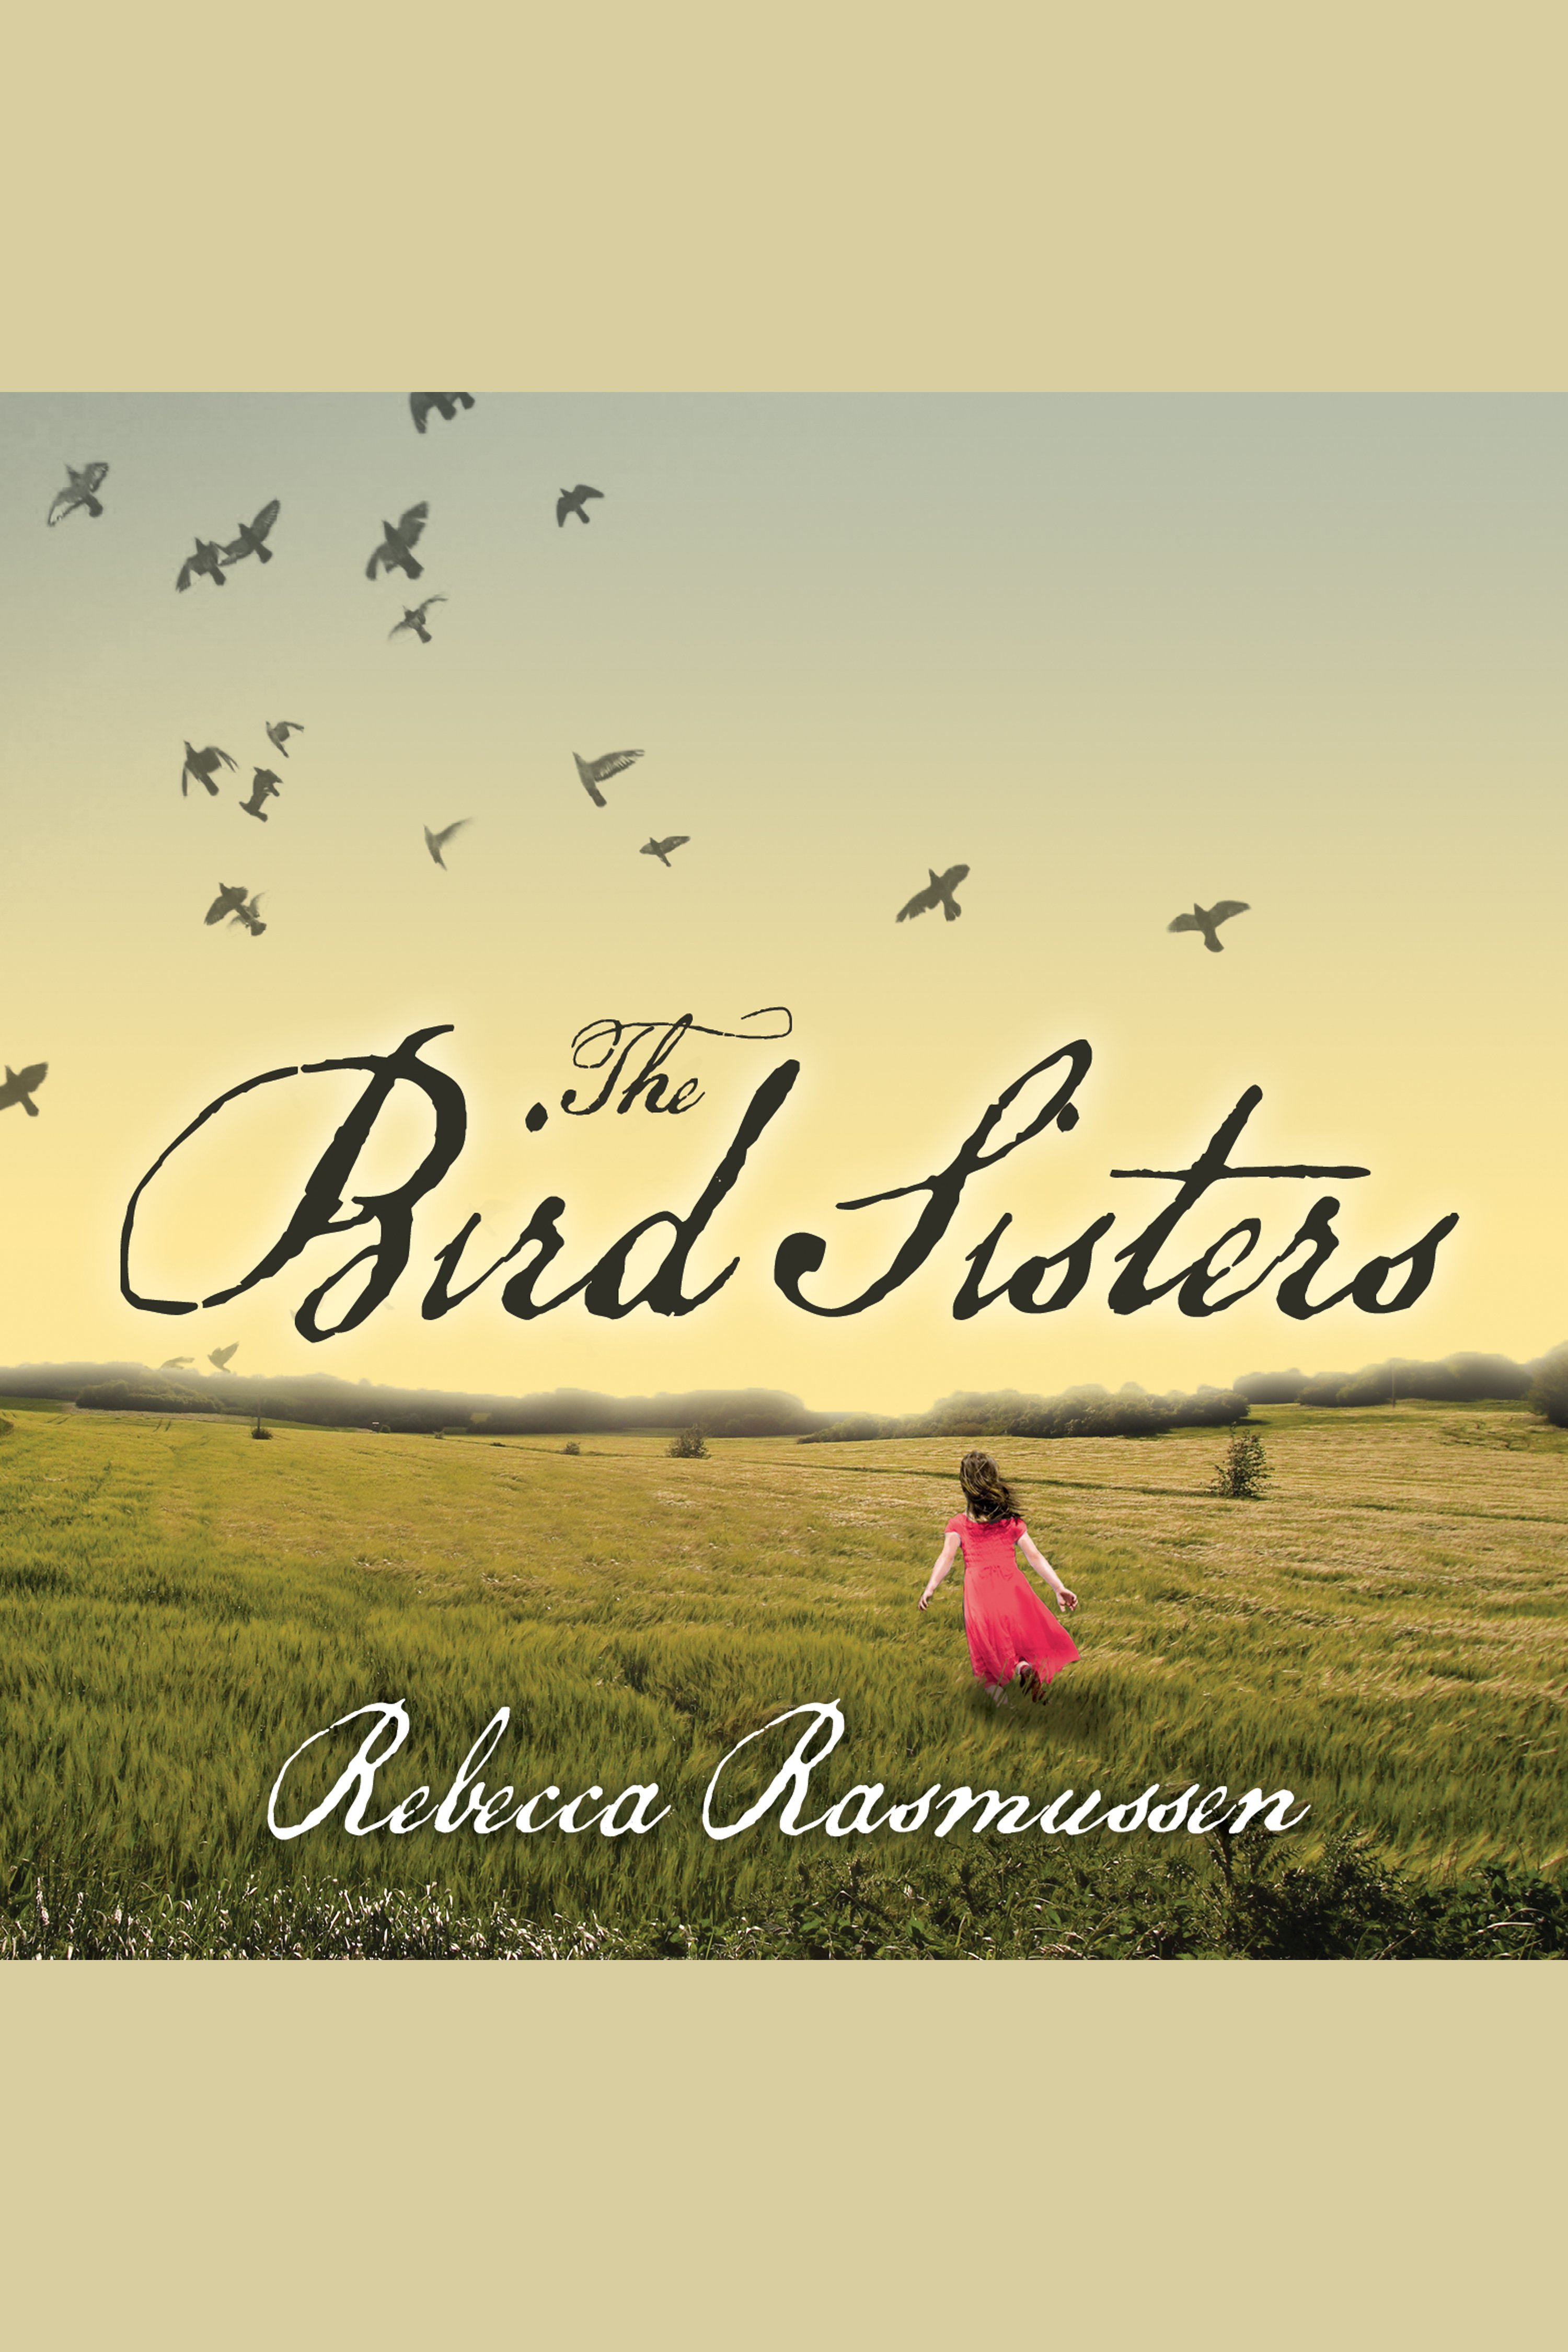 The Bird sisters cover image